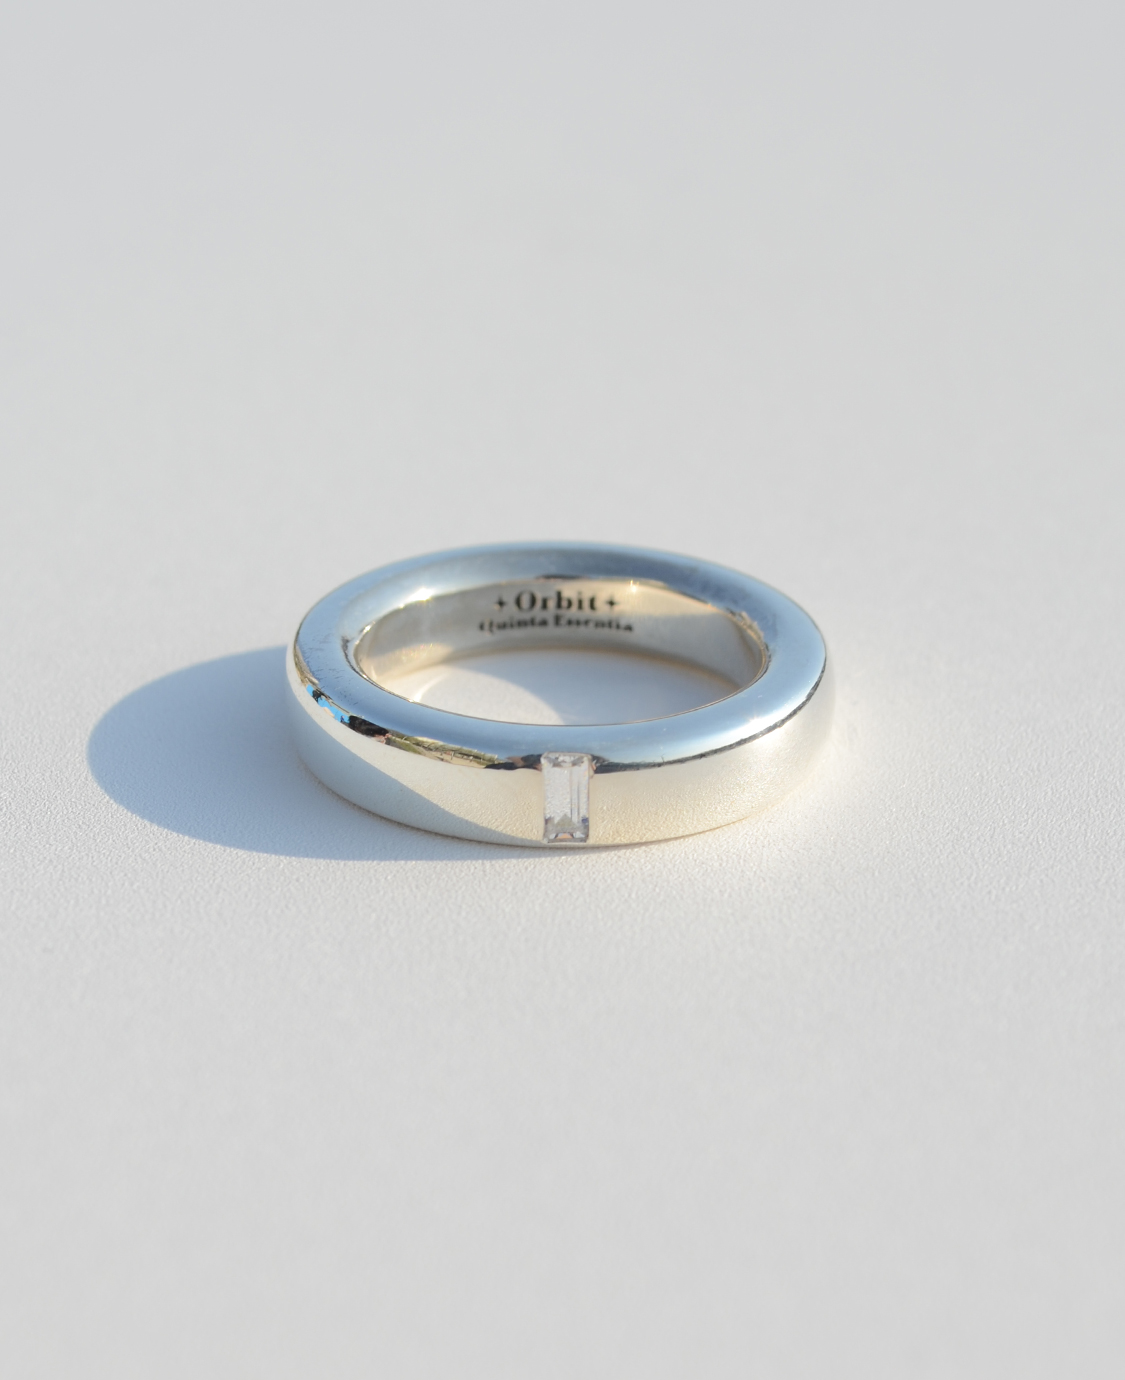 Oval Baguette Ring